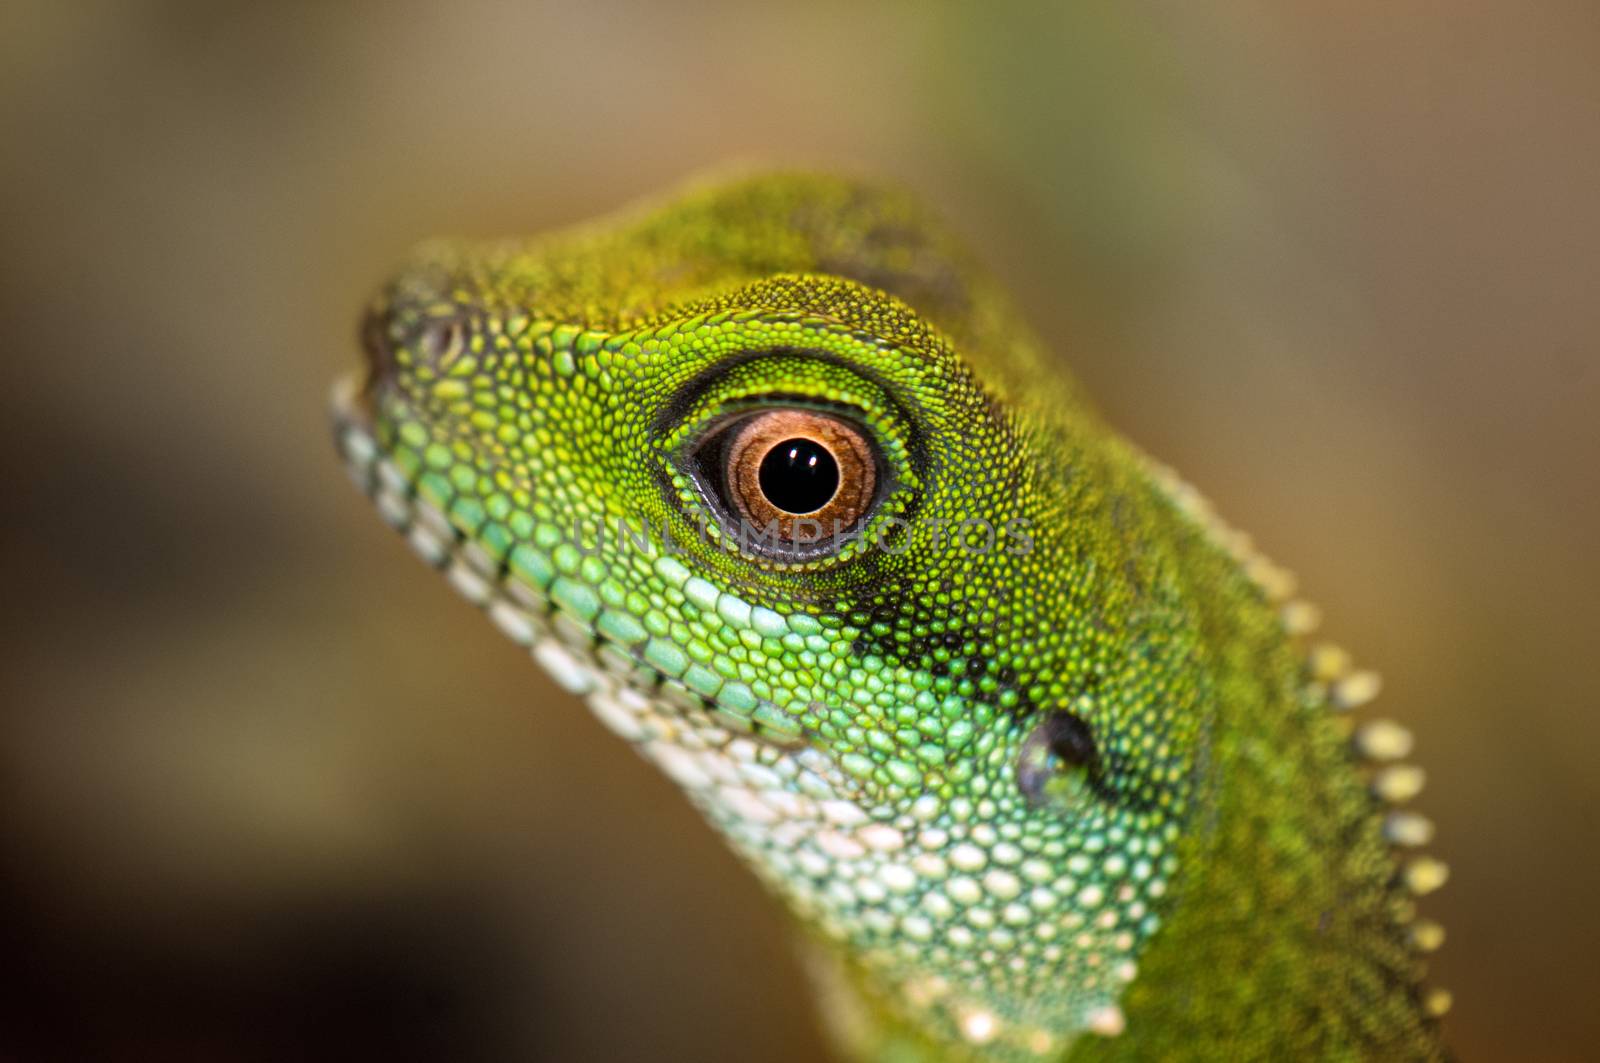 Green water dragon eye by rgbspace